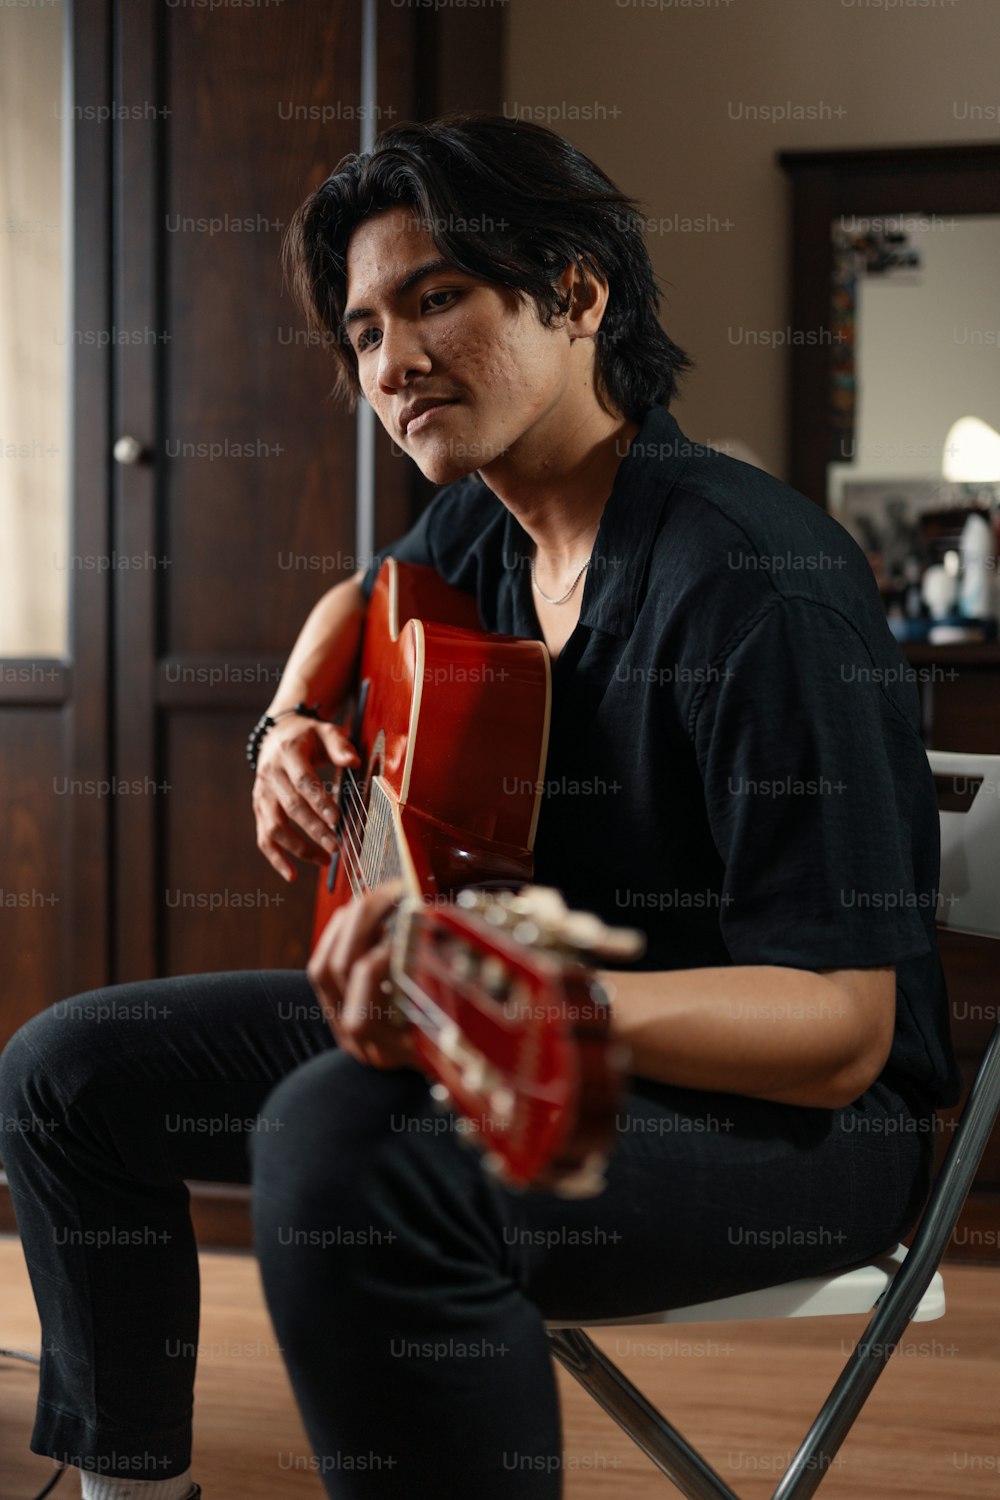 a man sitting in a chair holding a red guitar